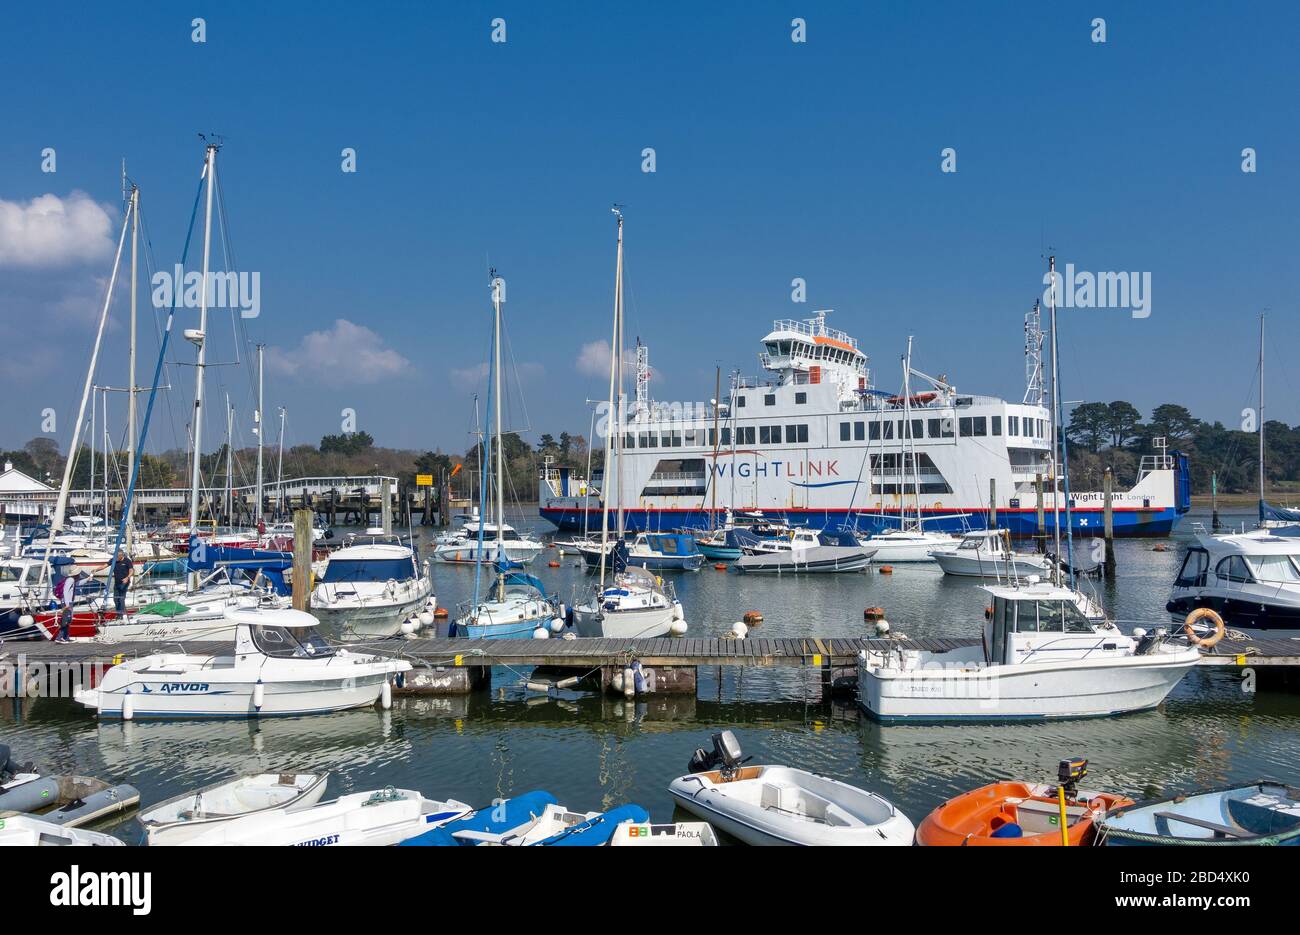 The Wightlink Ferry coming into Lymington Pier railway station and boats docked in Lymington Harbour in Hampshire, England, UK Stock Photo